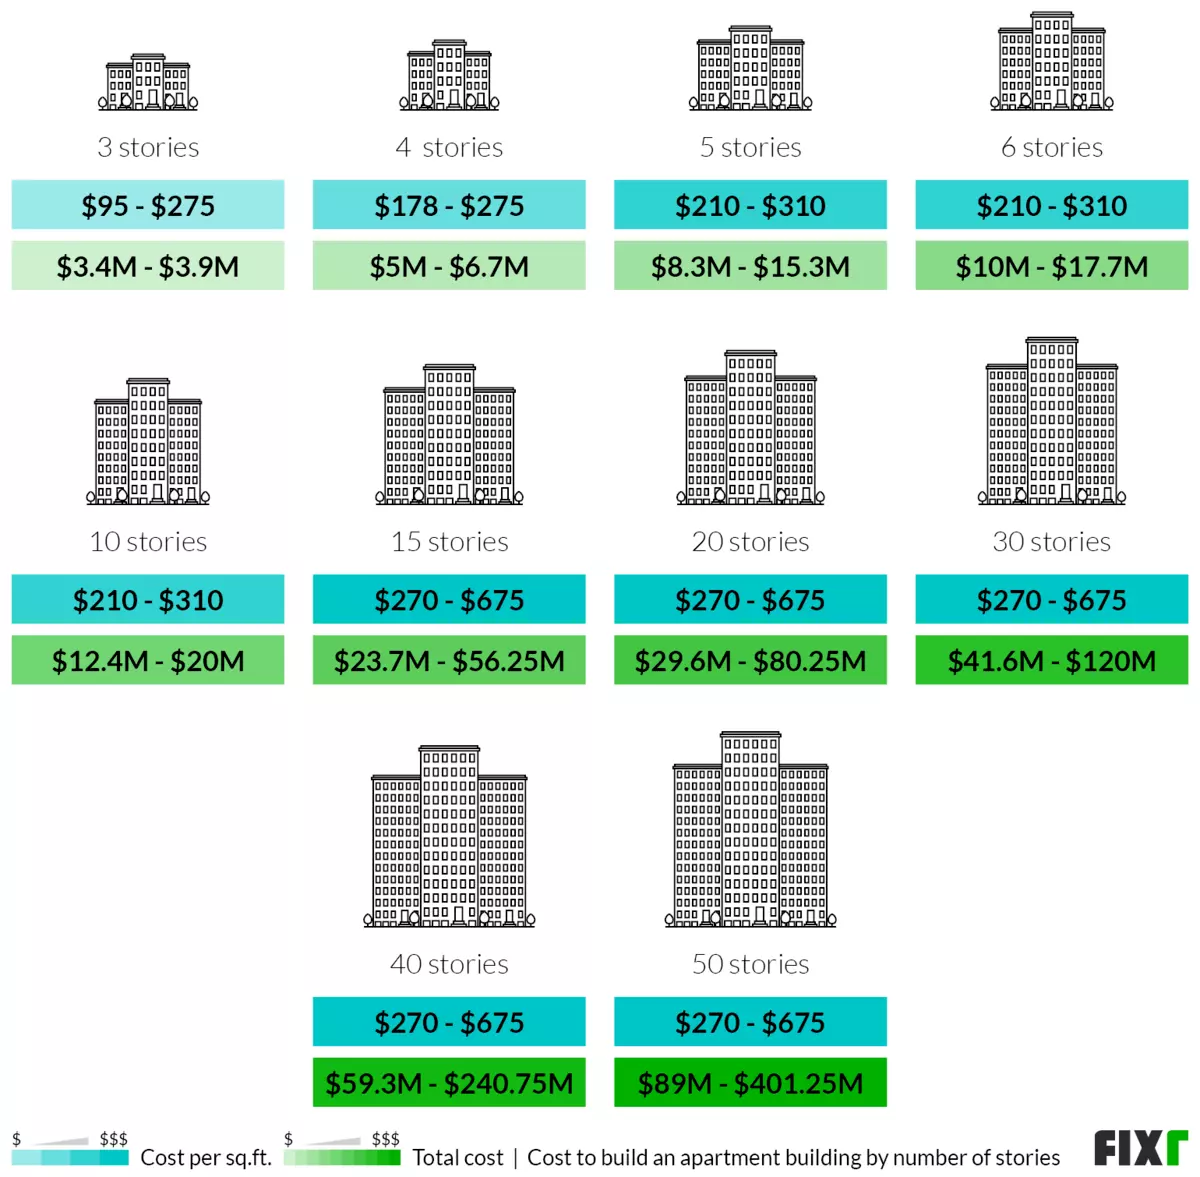 Cost to build a 3, 4, 5, 6, 10, 15, 20, 30, 40, and 50-story apartment building